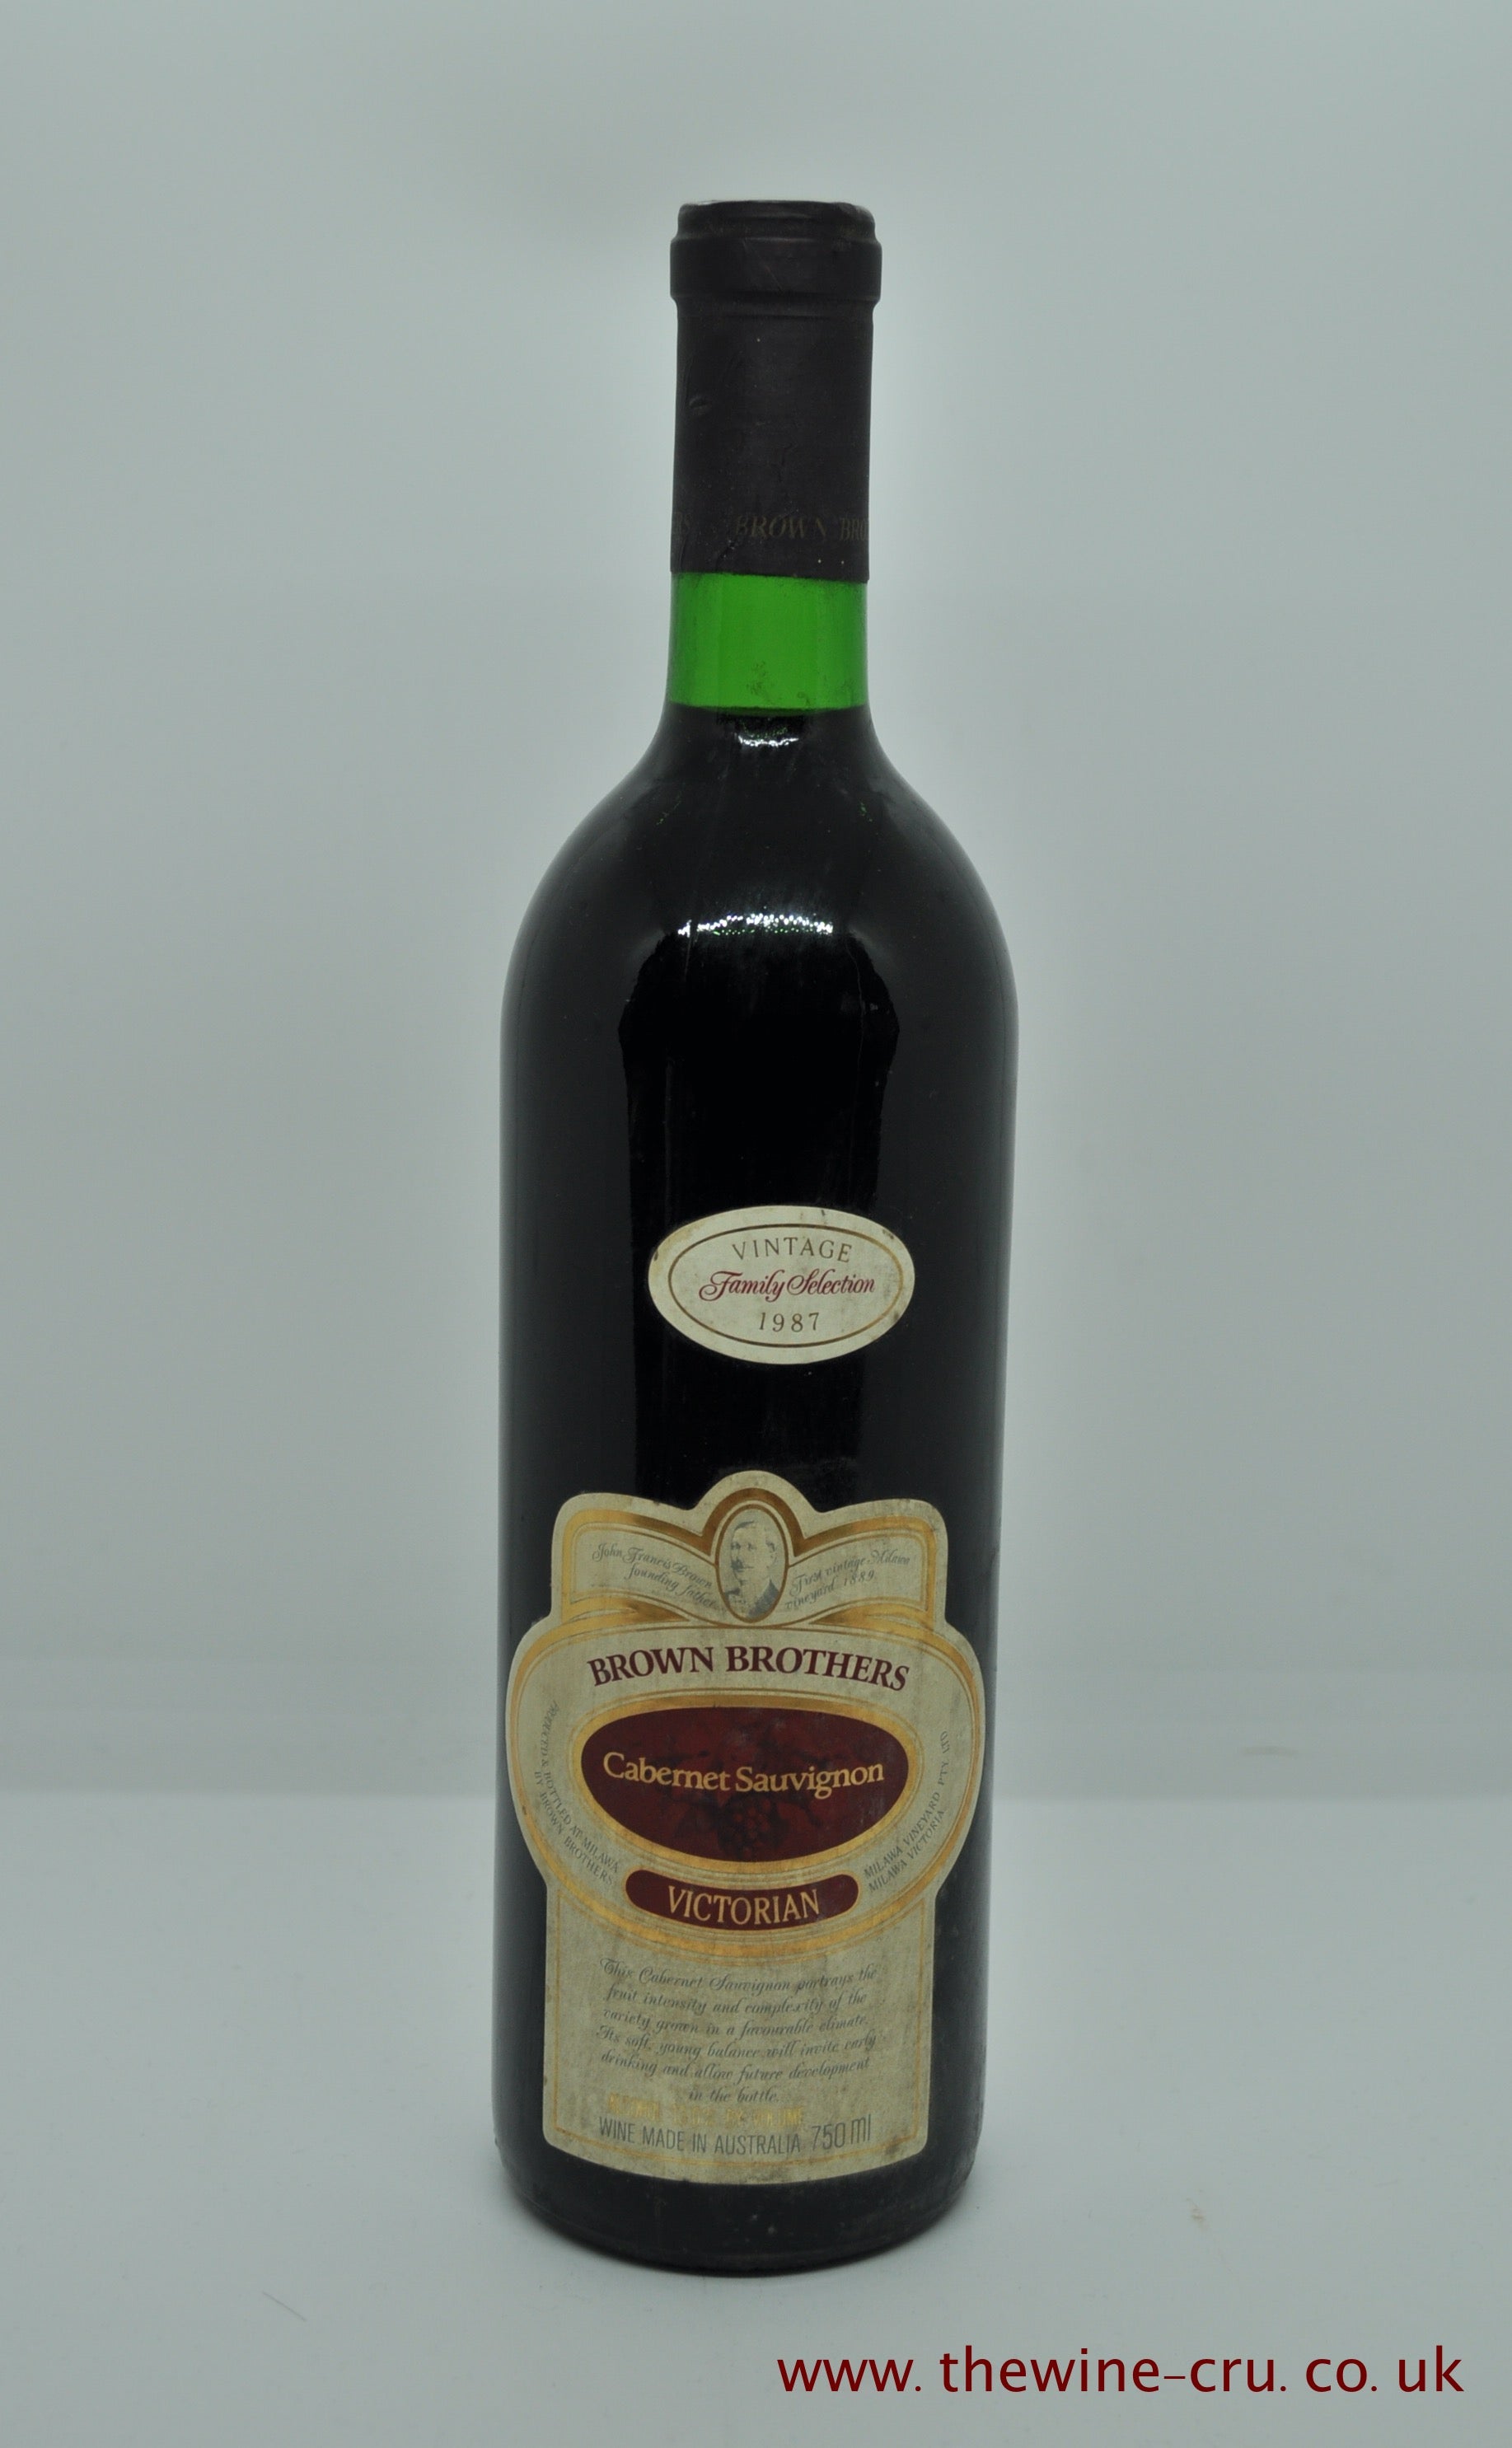 A single bottle of vintage red wine from Brown Bothers, Australia. Family selection Cabernet Sauvignon. The bottle is in good condition with the lwine level at base of neck. Immediate delivery. Free local delivery. Gift wrapping available